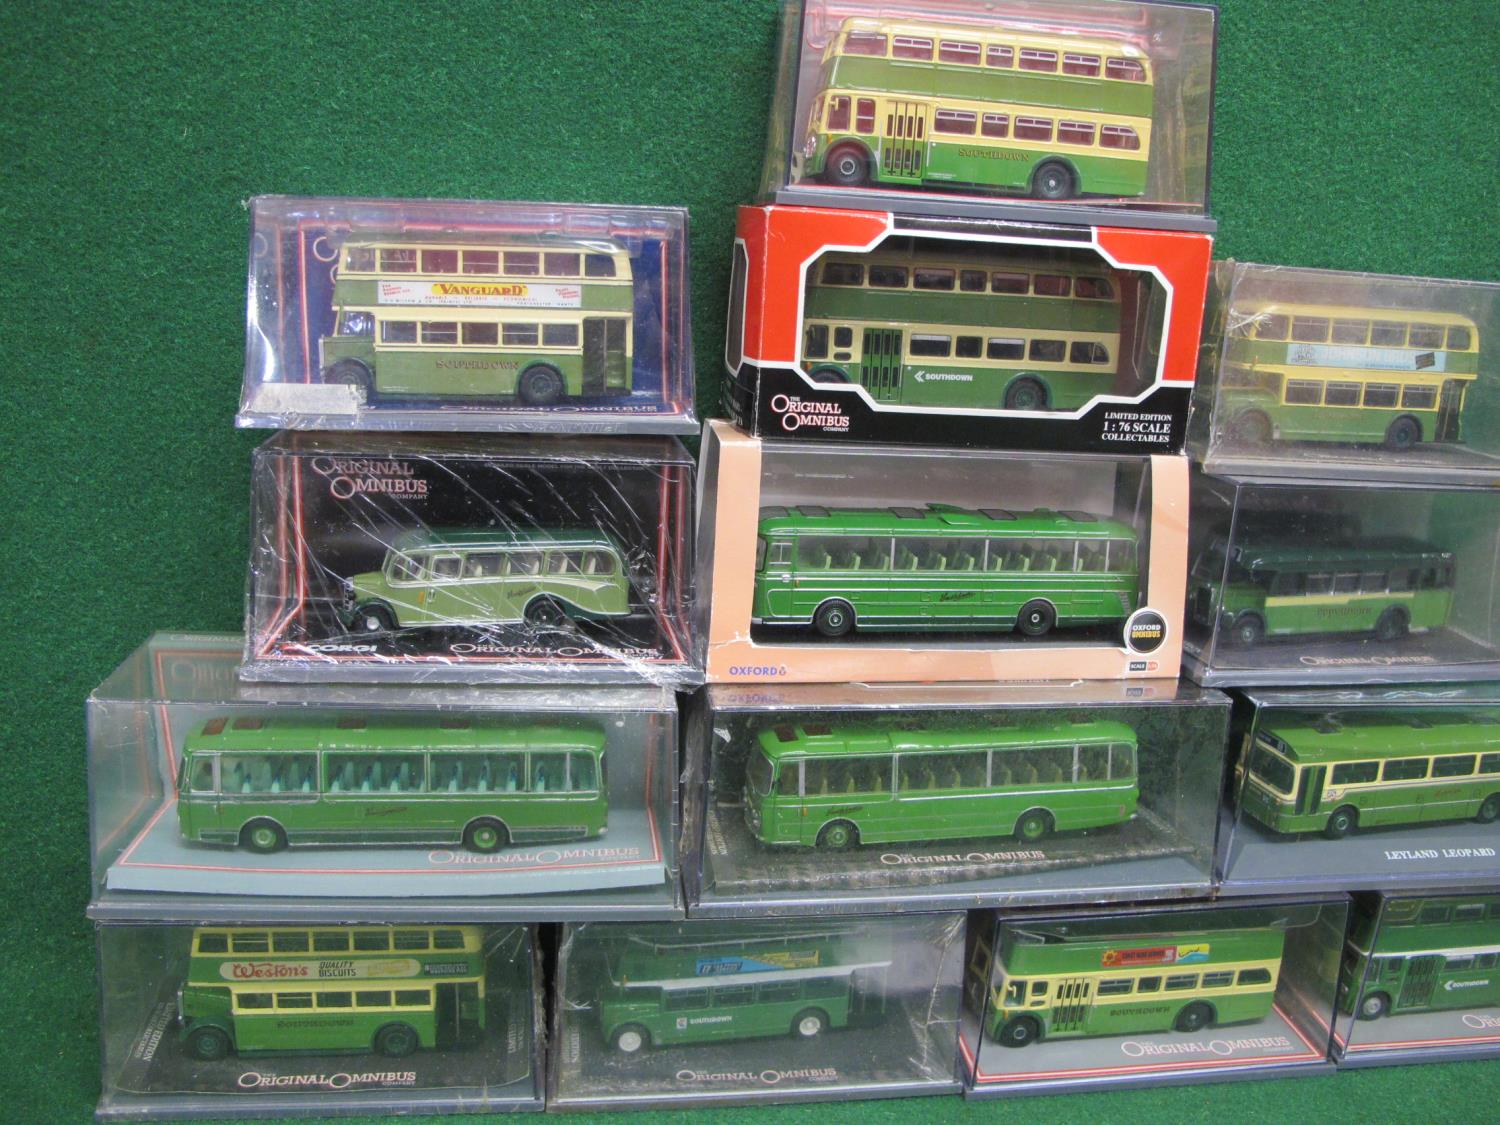 Fourteen Southdown liveried buses and coaches (thirteen Corgi Original Omnibus and one Oxford - Image 3 of 3